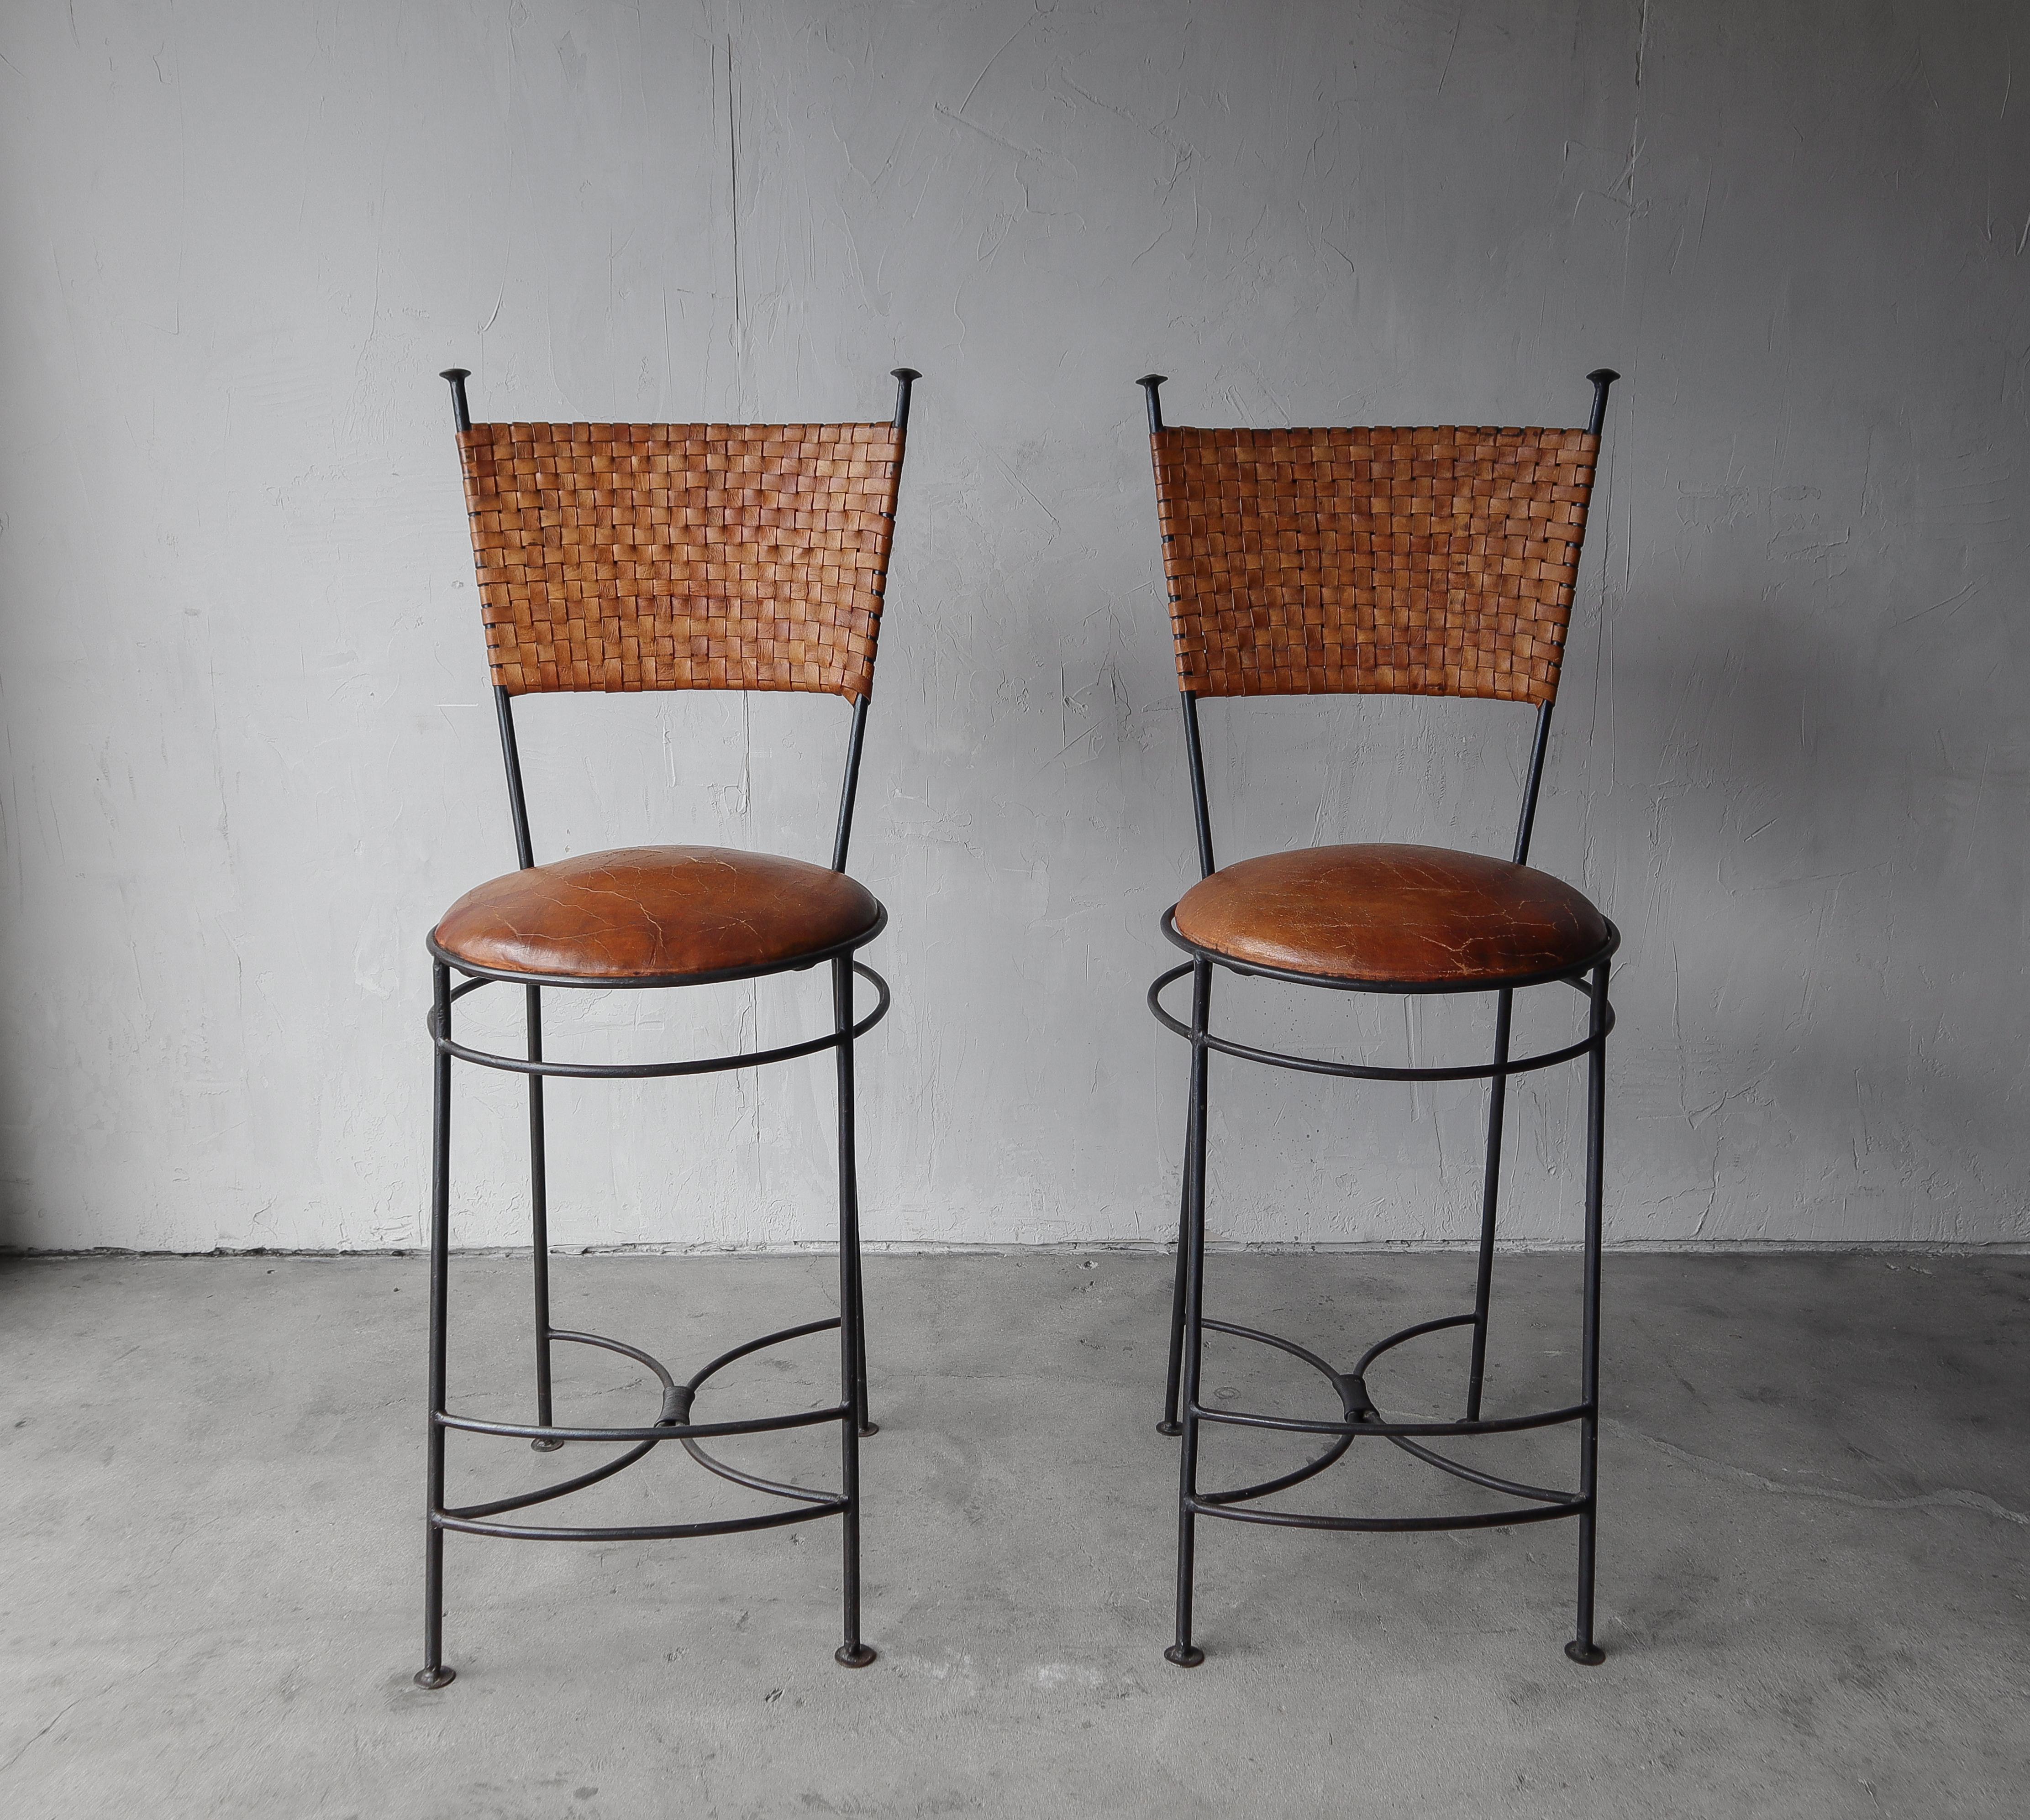 Pair of perfectly patinaed, woven leather, bar stools. Stools have beautifully worn leather for that great Industrial look.   They are oversized, perfect for someone who needs just 2.

The stools have beautiful wear and patina on the leather, marks